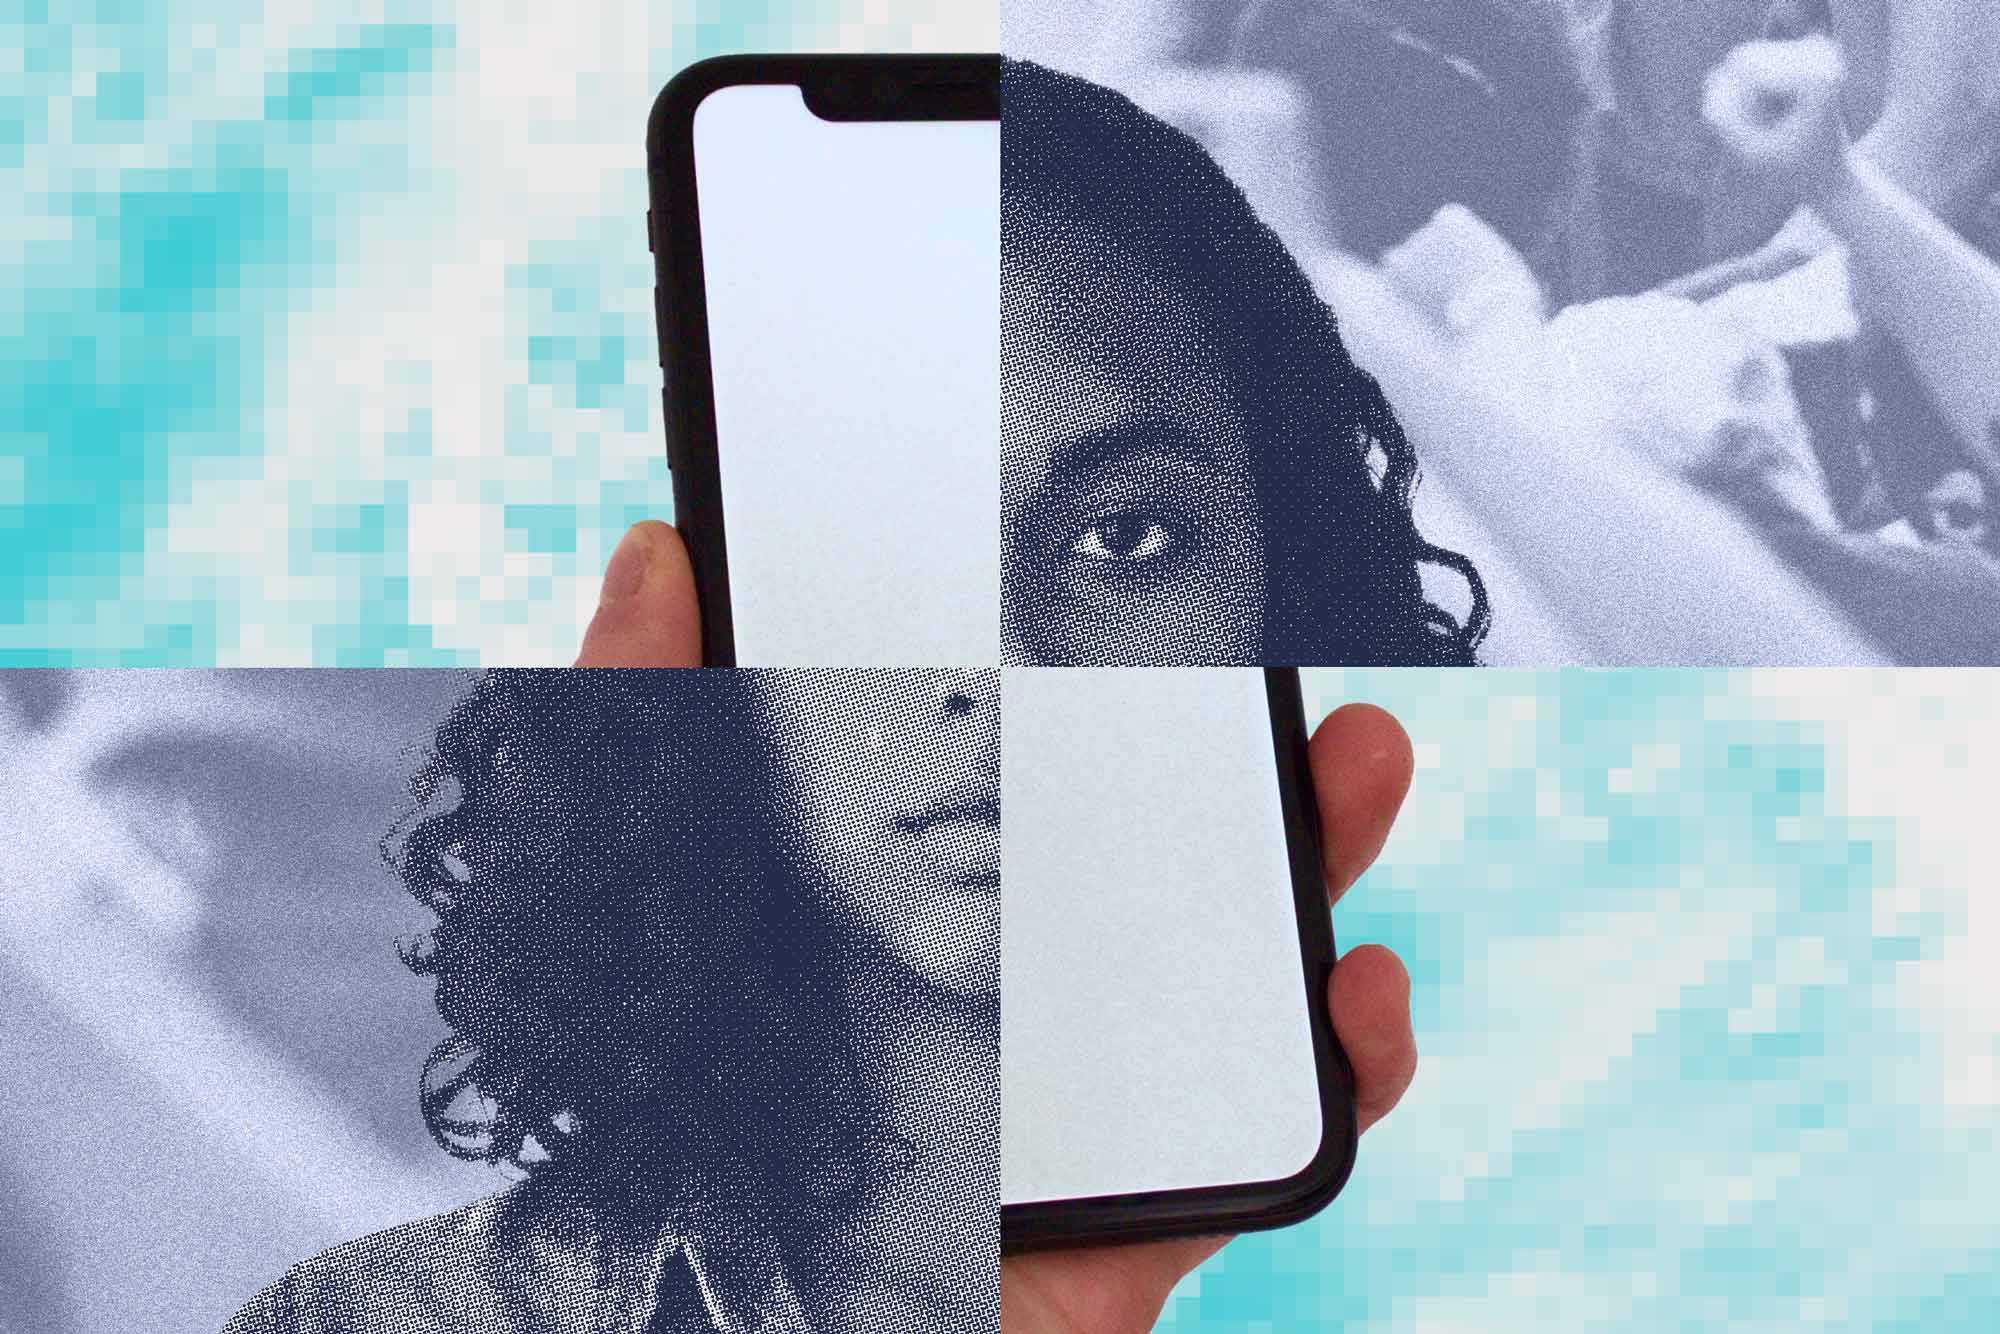 A quad split screen of an iphone and a woman's face 